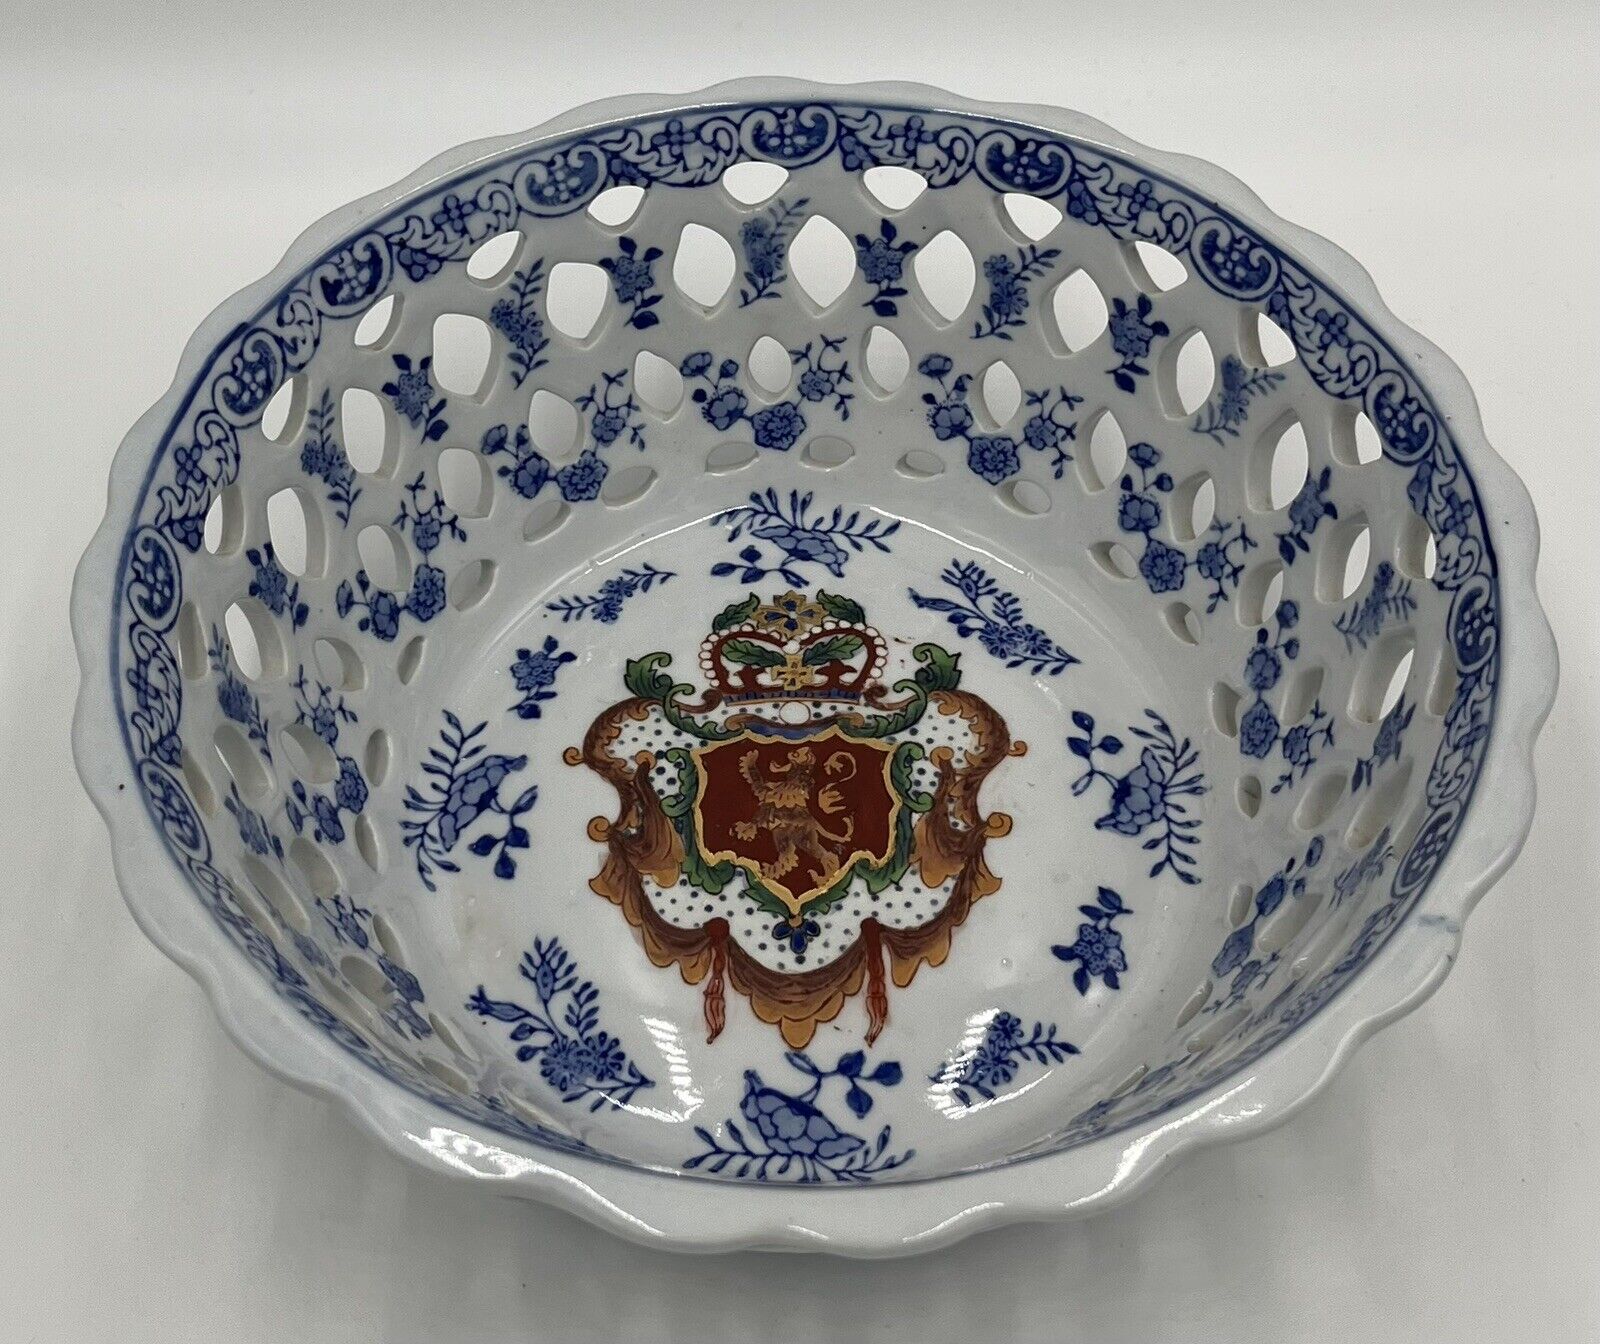 Andrea by Sadek Decorative Reticulated Scalloped Large Bowl Lion Seal Blue White